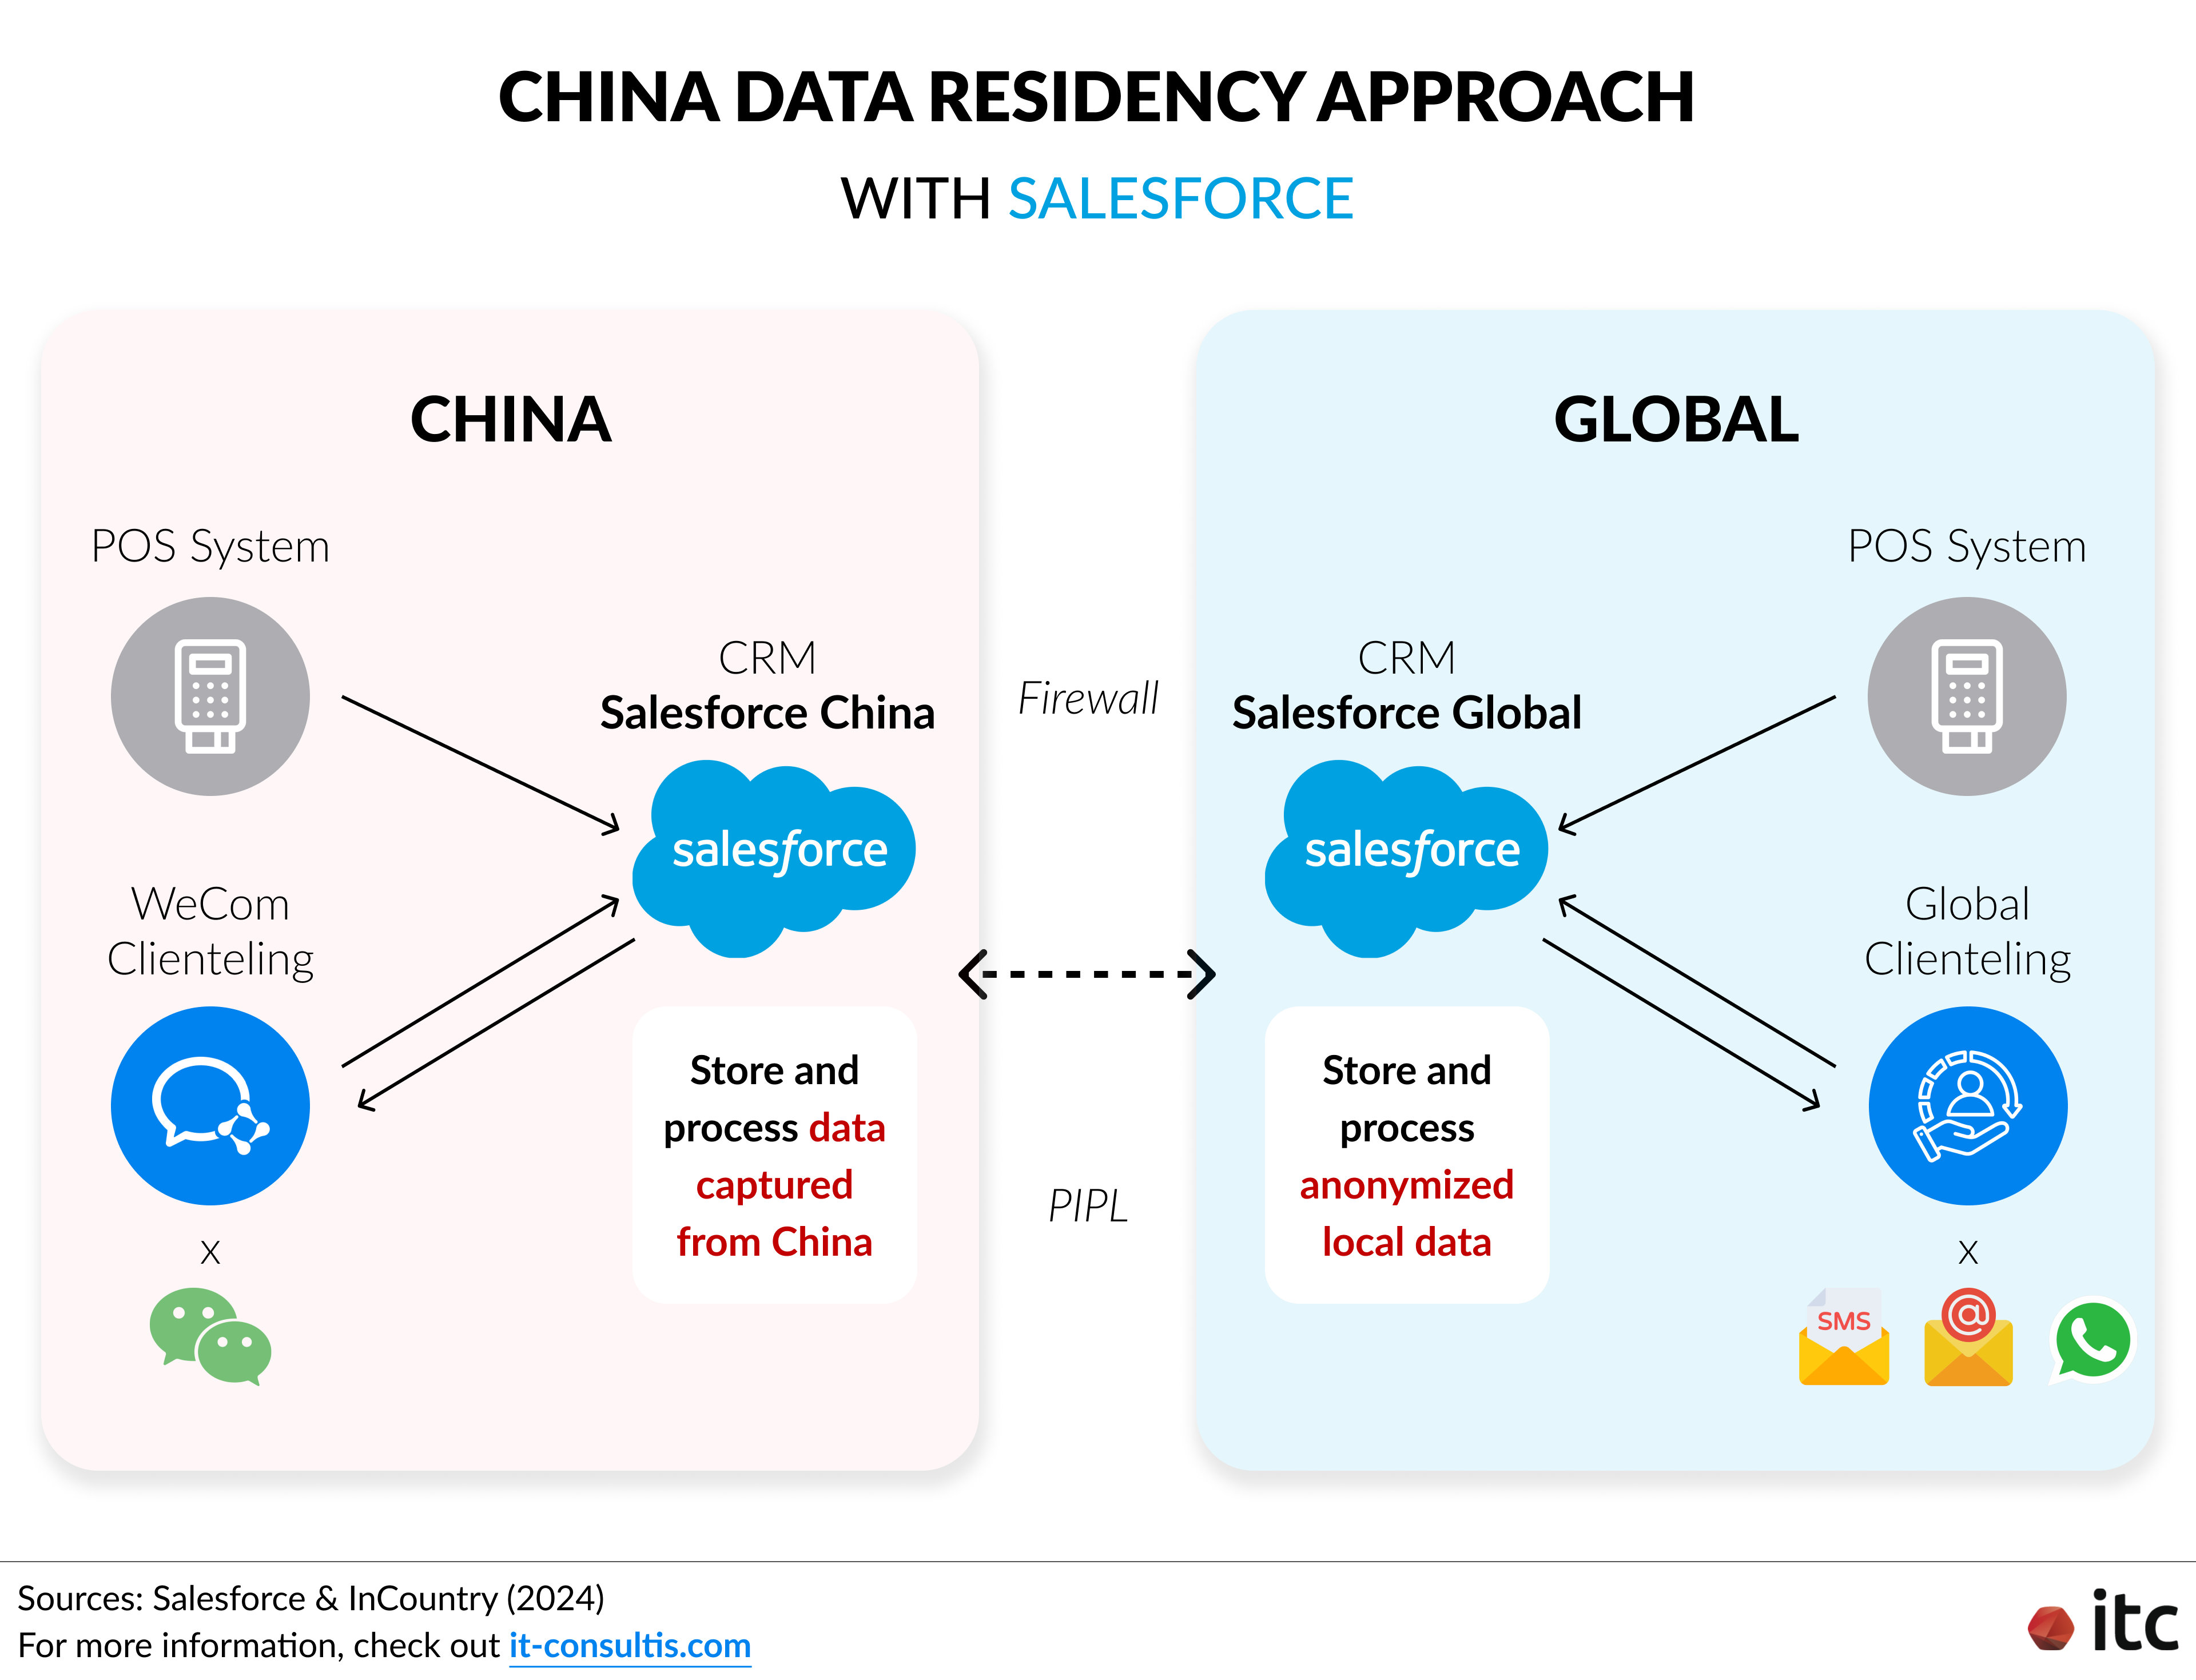 China data residency approach with Salesforce China enable brands to store and process data captured from China within the China CRM and transferring their anonymized version to the global CRM